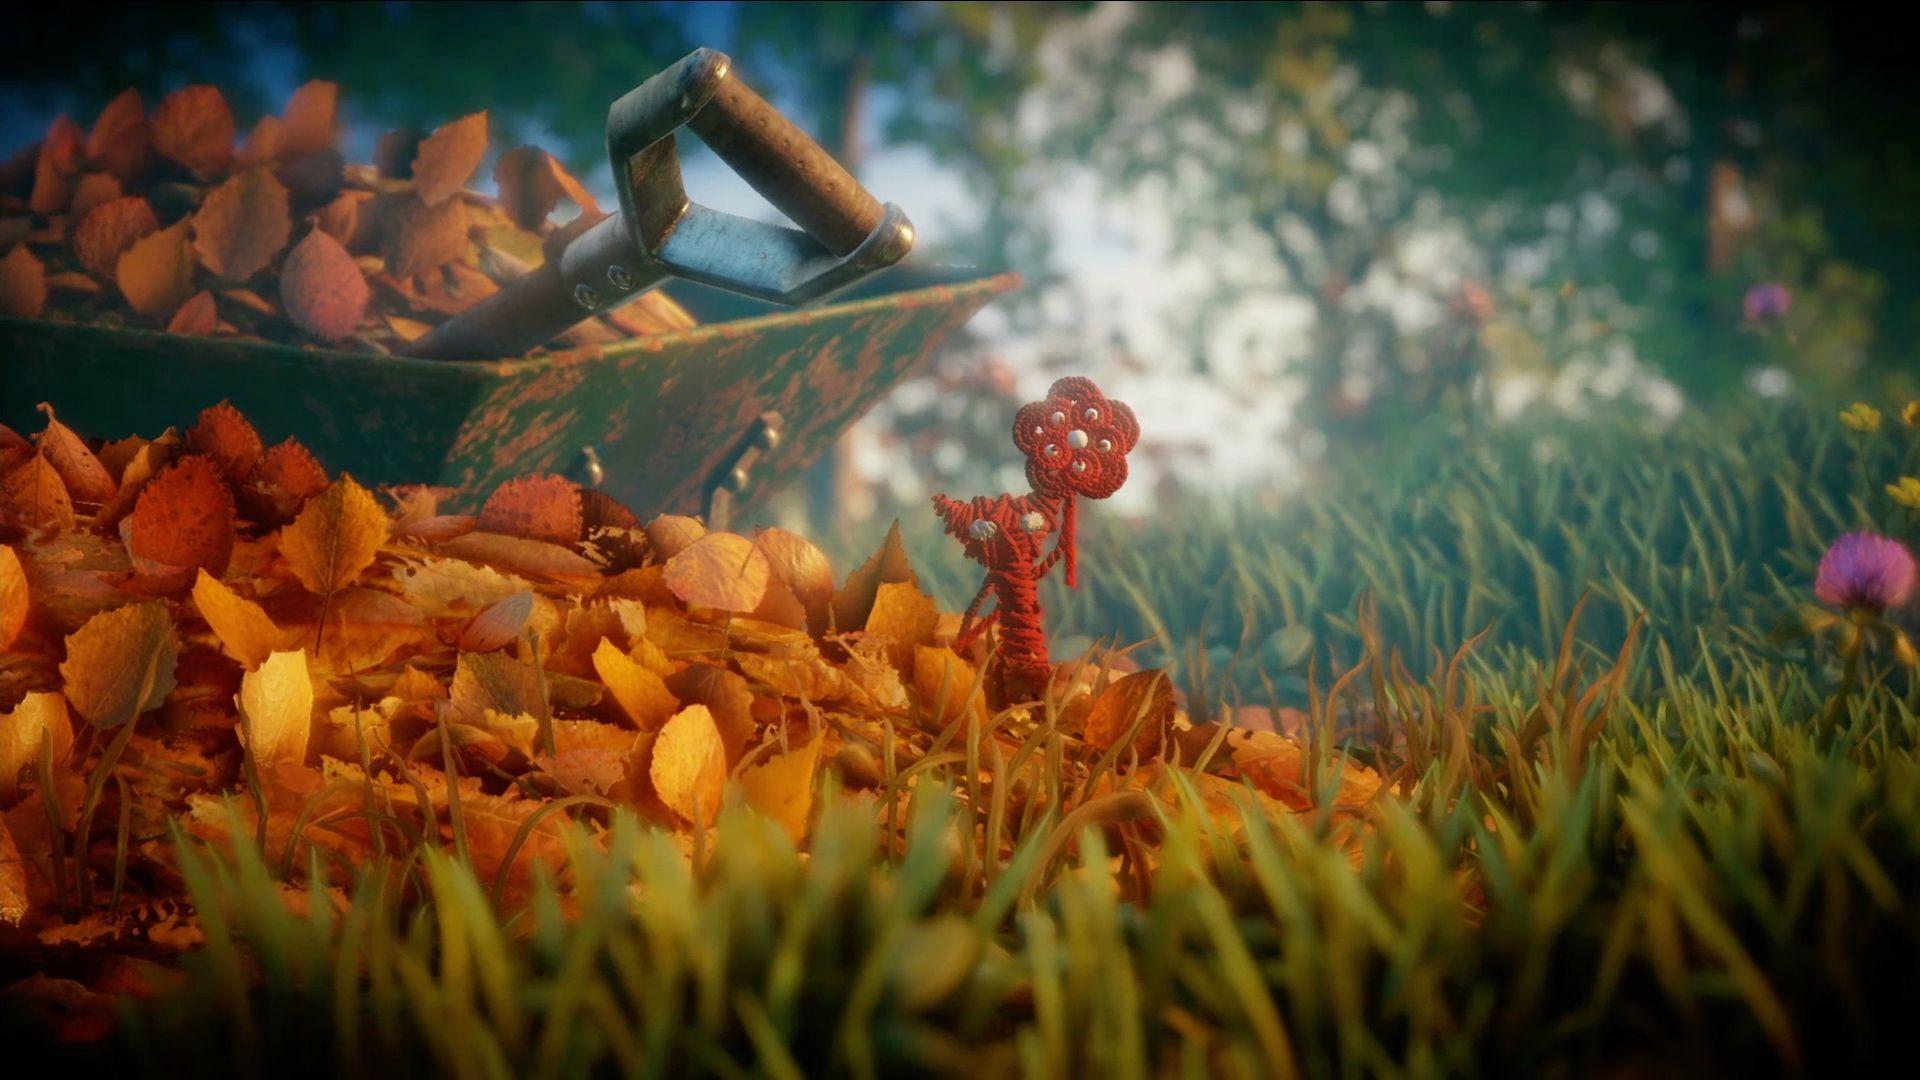 HD Wallpaper, Game Background 1920×1080 Unravel Wallpaper